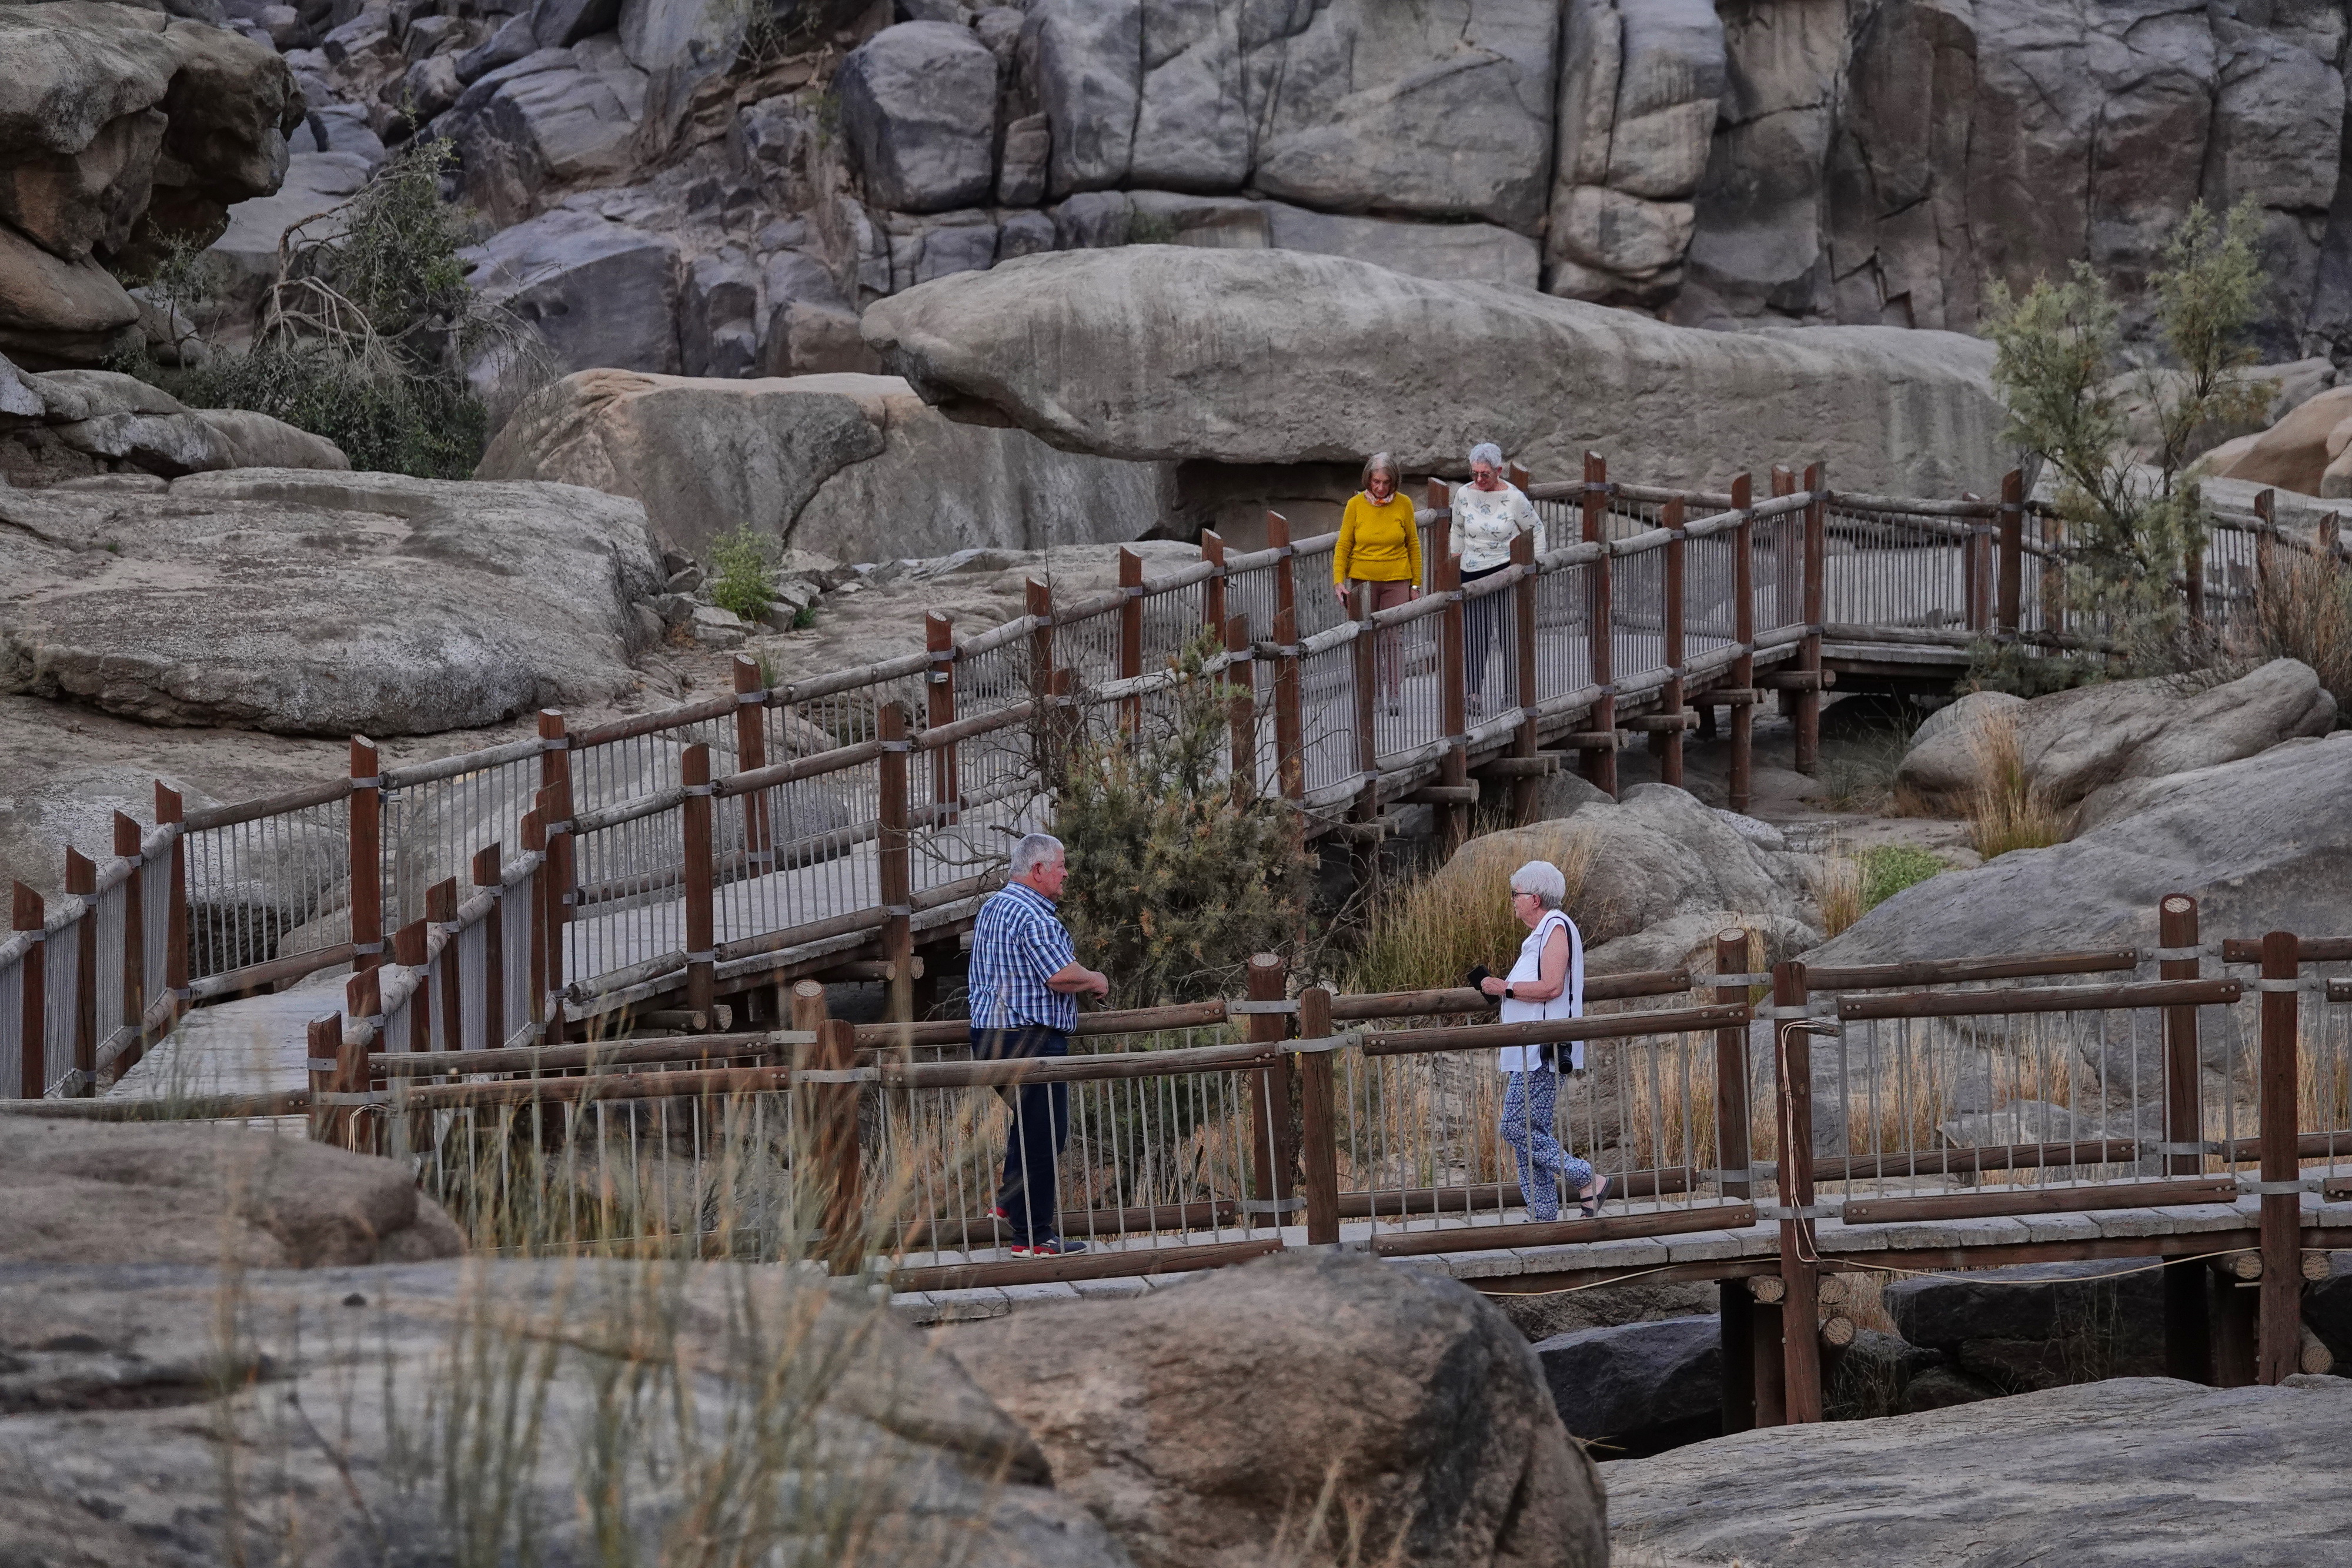 The walkways are well signposted and safe for elderly visitors. Image: Chris Marais